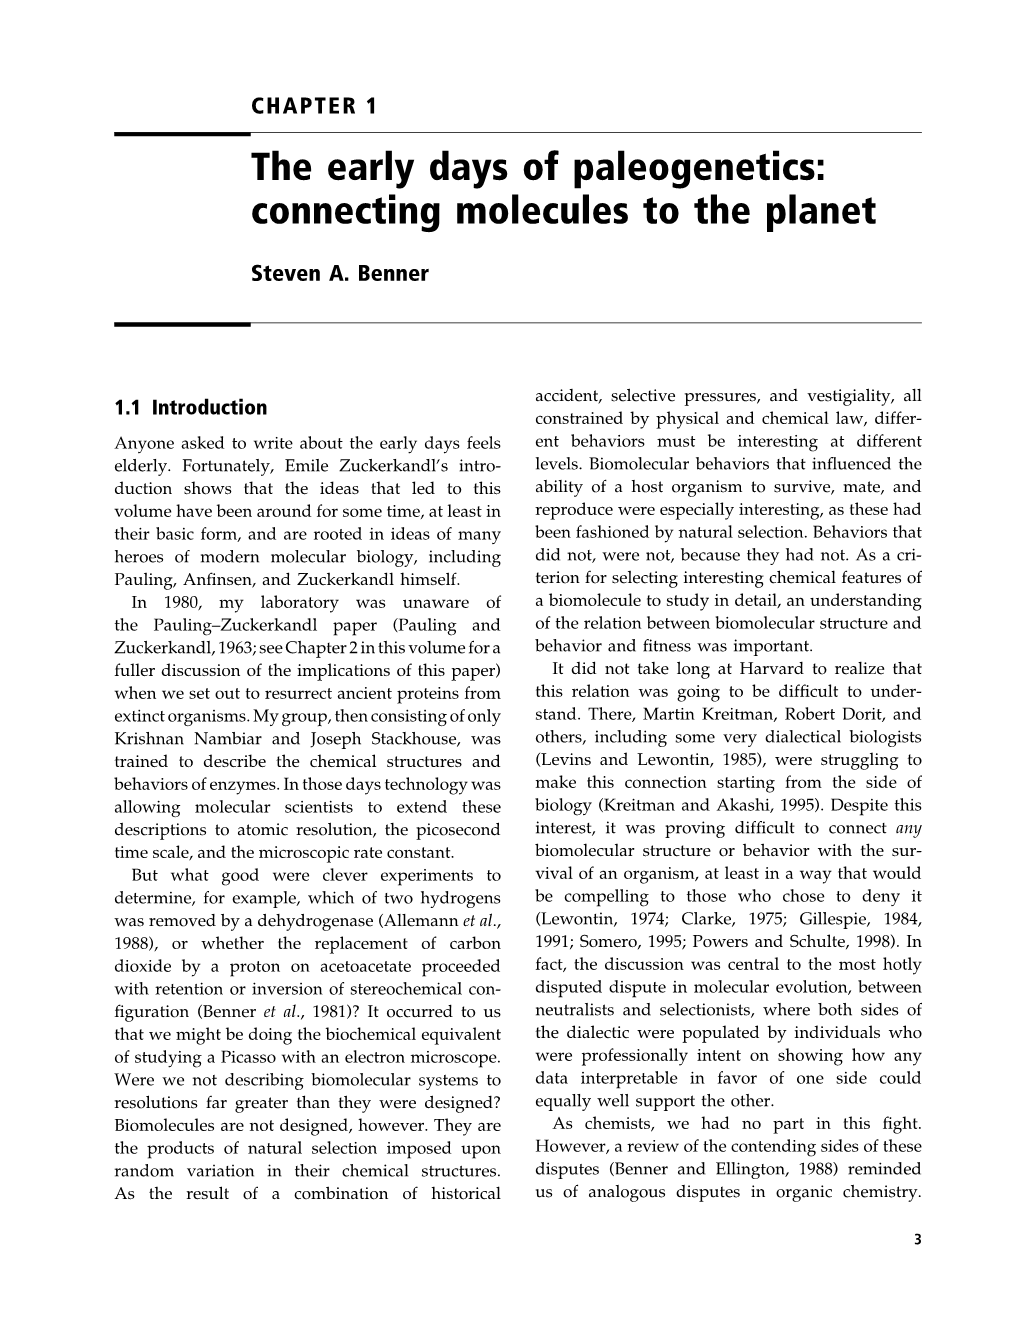 The Early Days of Paleogenetics: Connecting Molecules to the Planet